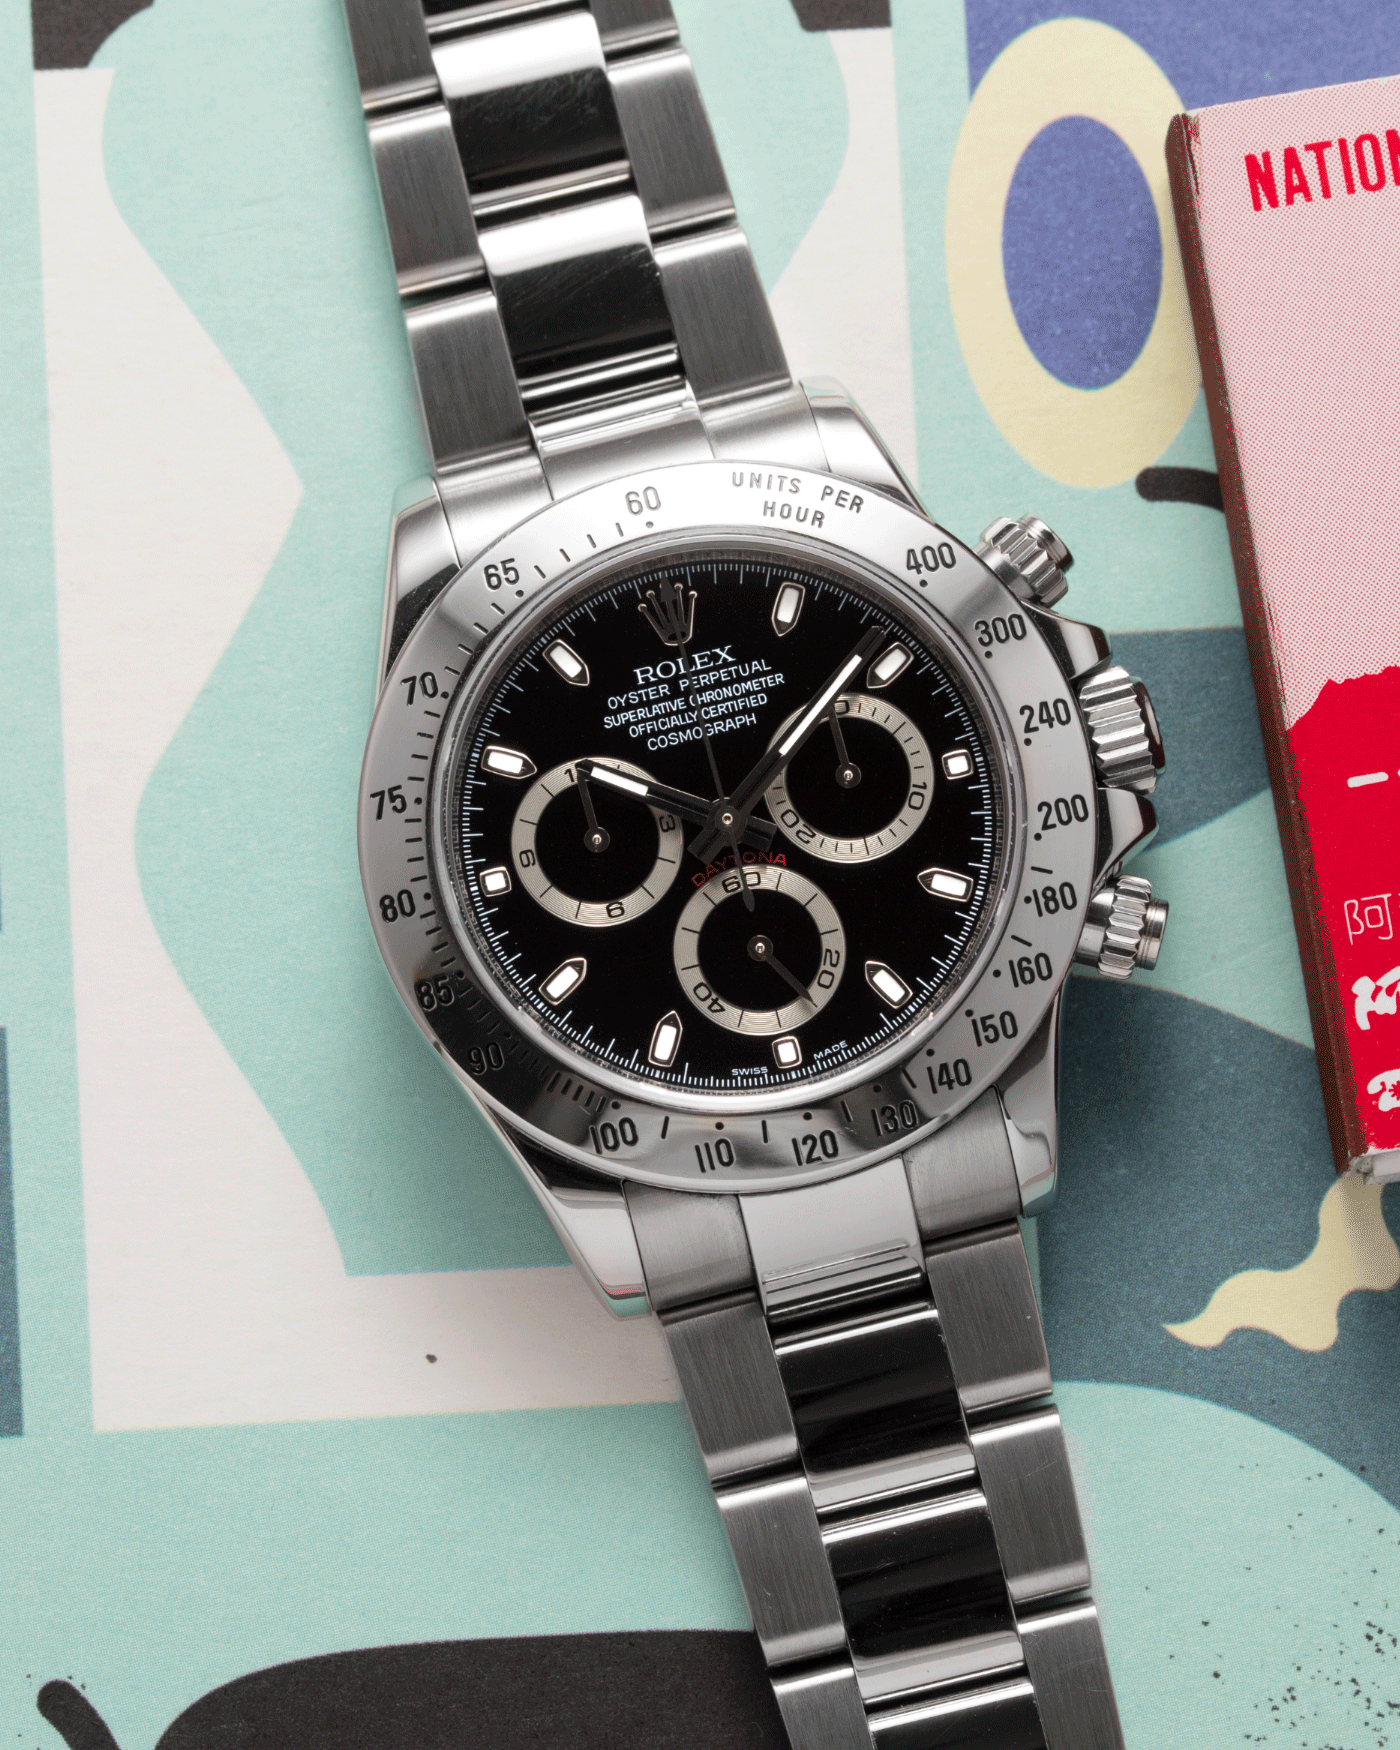 Brand: Rolex Year: 2007 Model: Daytona Reference: 116520 Material: Stainless Steel Movement: Calibre 4130 Case Diameter: 40mm Strap: Stainless Steel Rolex Oyster Bracelet